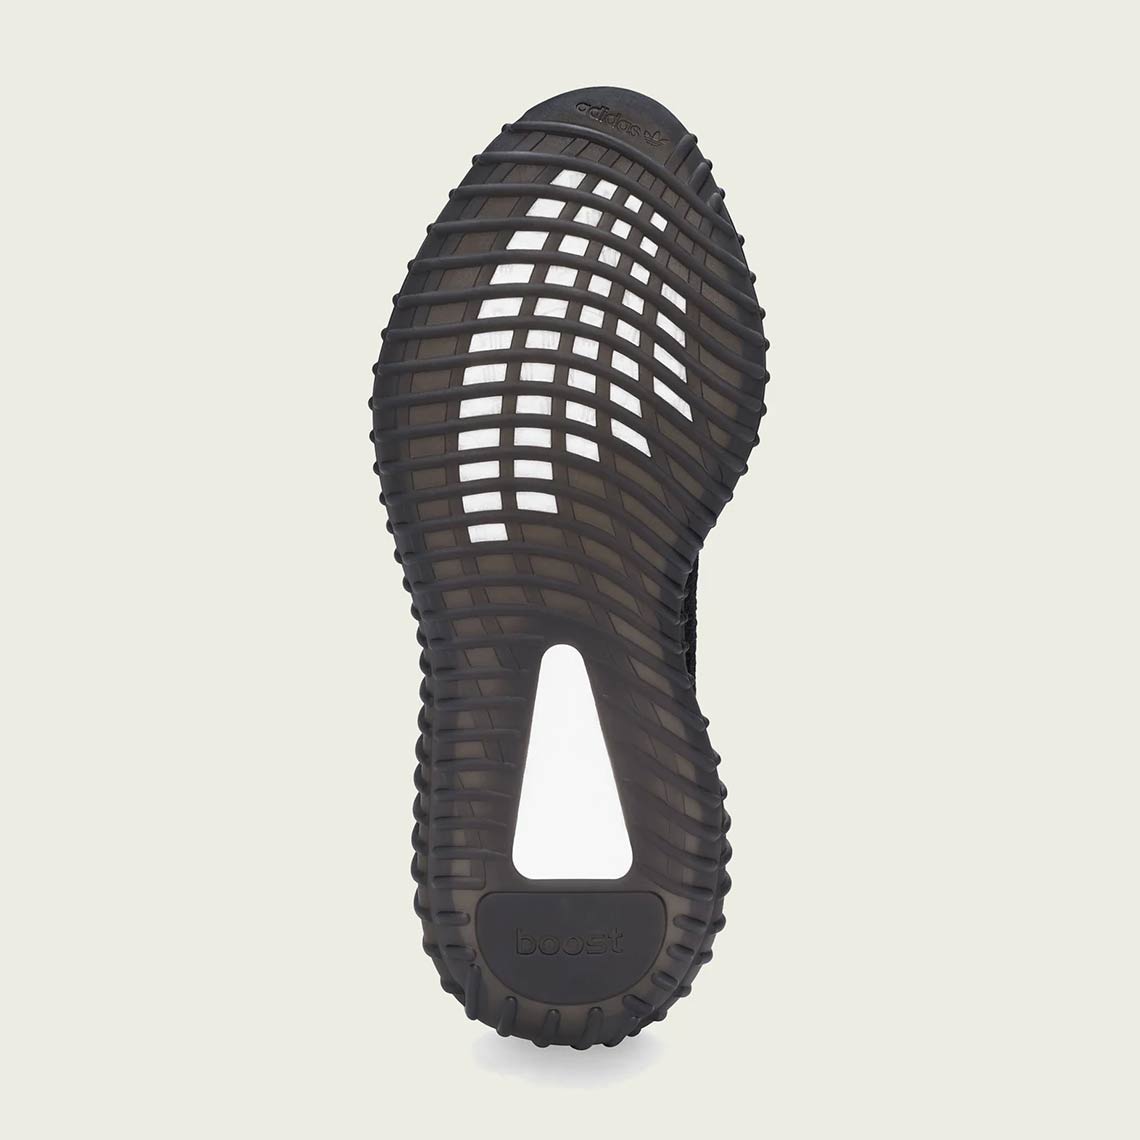 Adidas Yeezy Boost 350 V2 Bred Store List 2